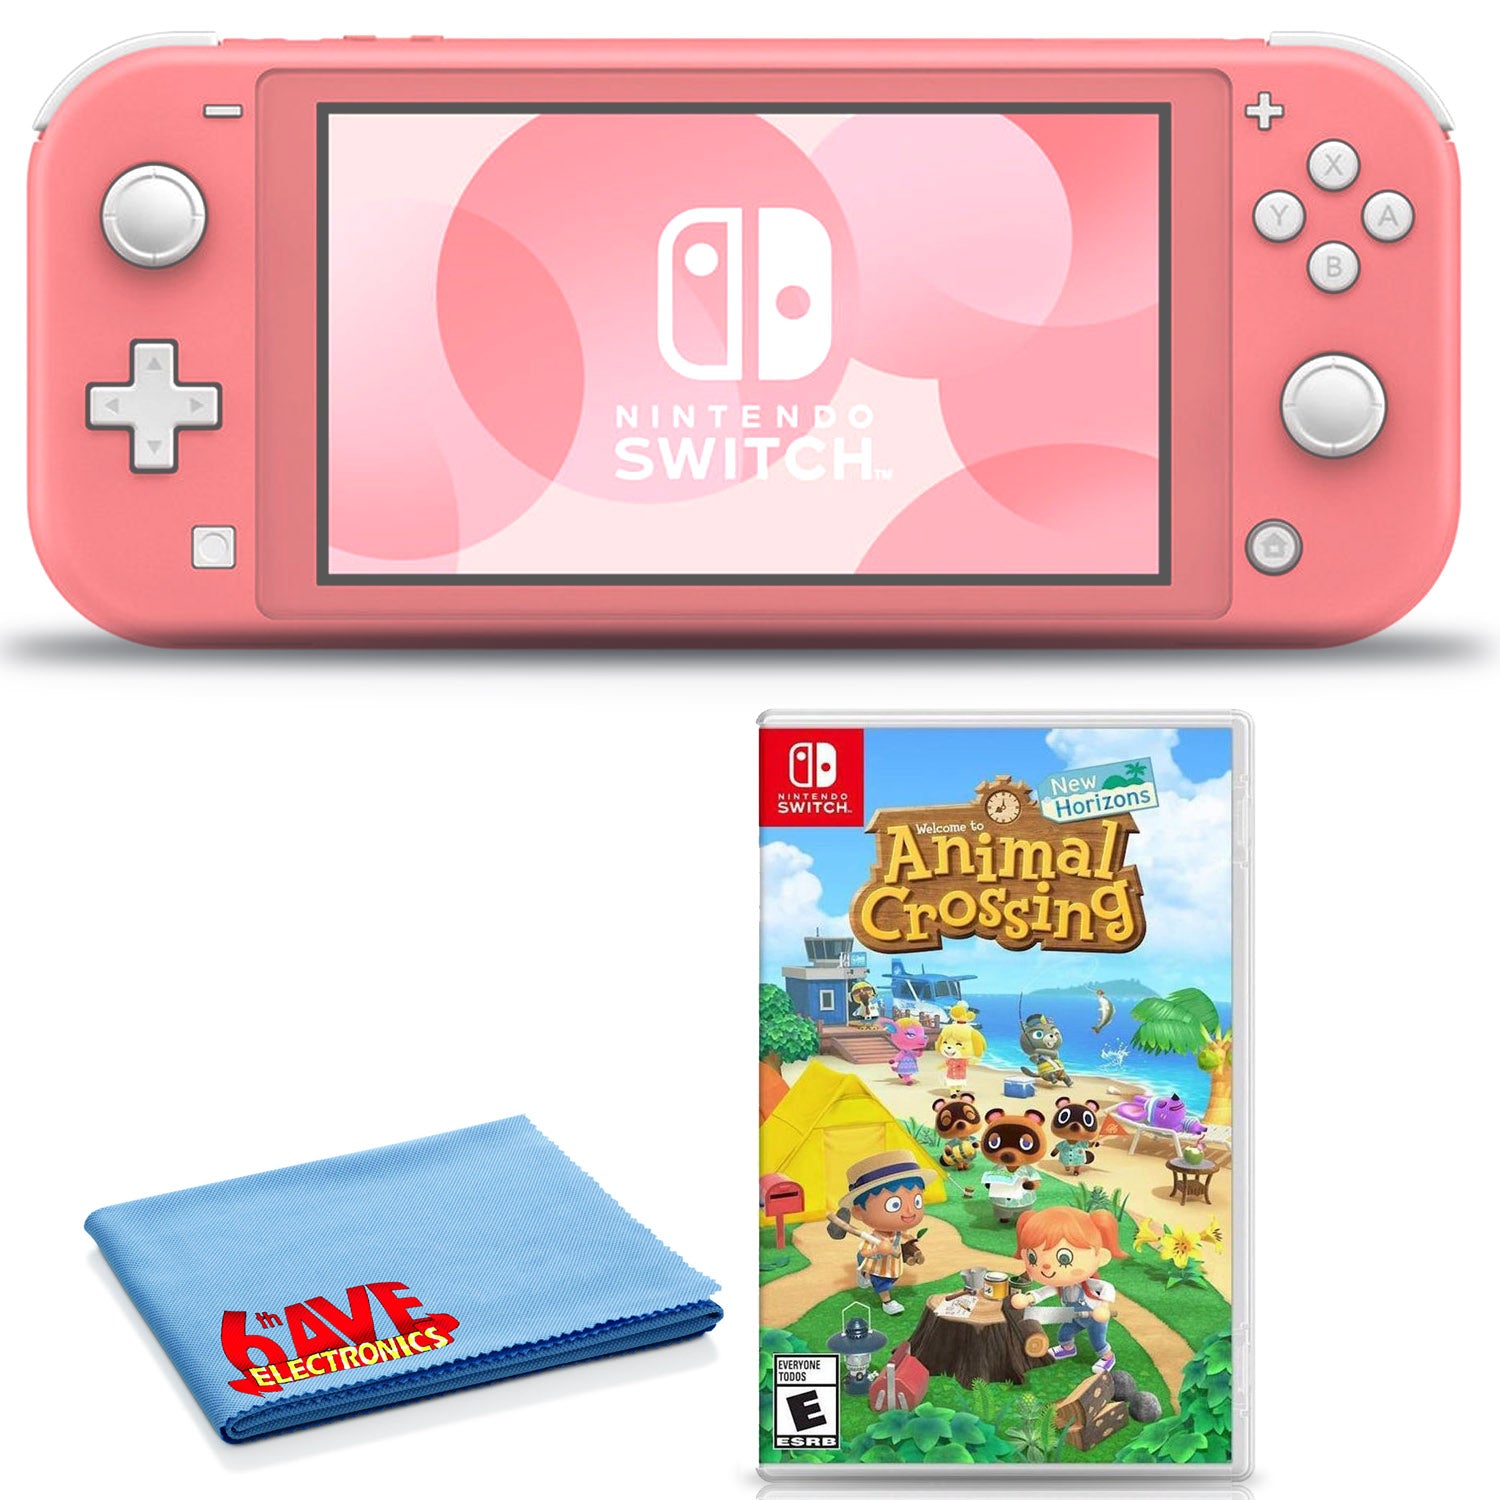 Nintendo Switch Lite 32GB Handheld Gaming Console with Animal Crossing